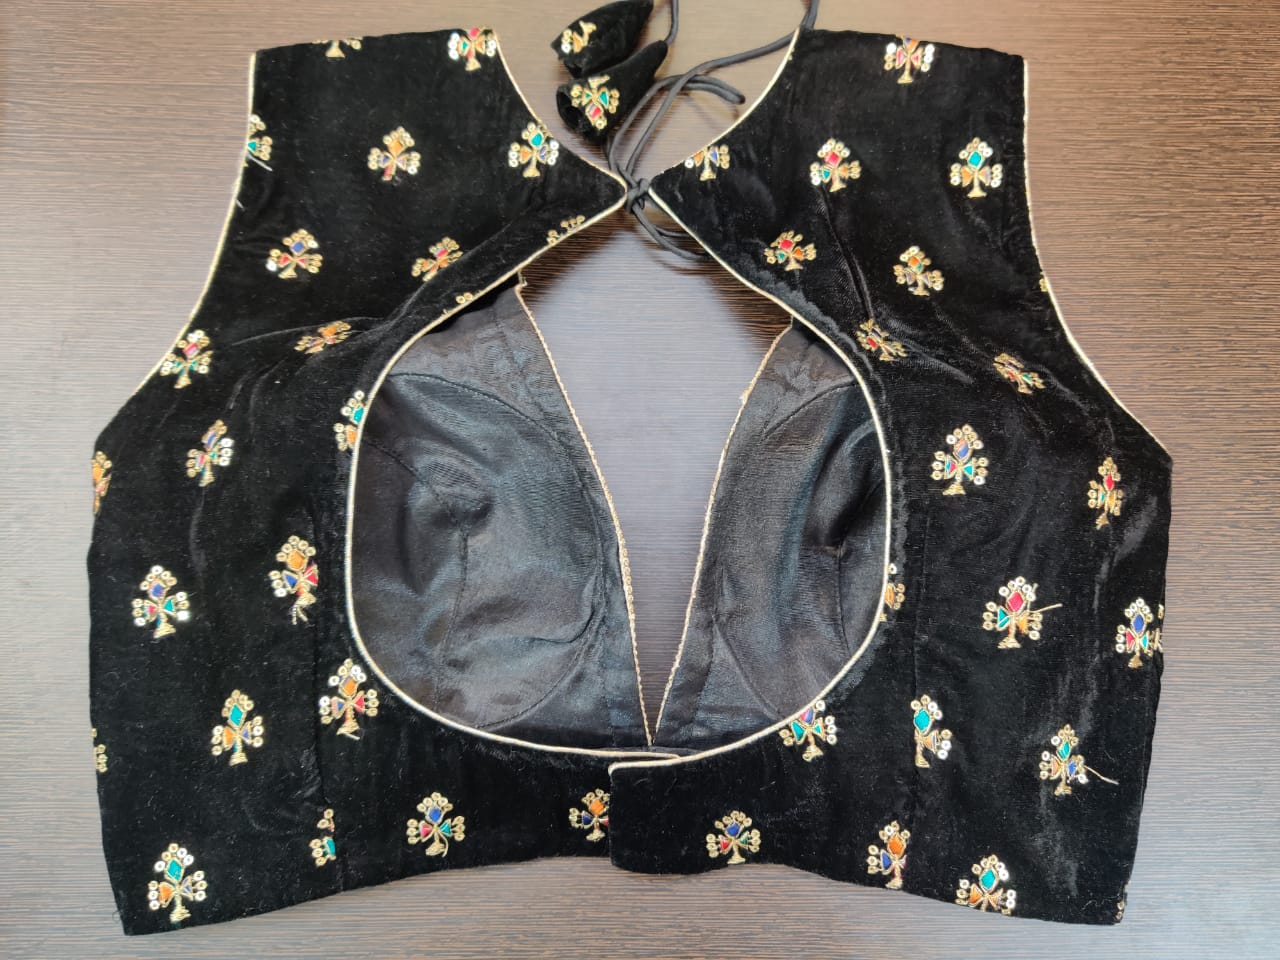 Buy stunning black embroidered sleeveless saree blouse online in USA. Elevate your Indian saree style with exquisite readymade sari blouse, embroidered saree blouses, Banarasi sari blouse, designer sari blouse from Pure Elegance Indian clothing store in USA.-back